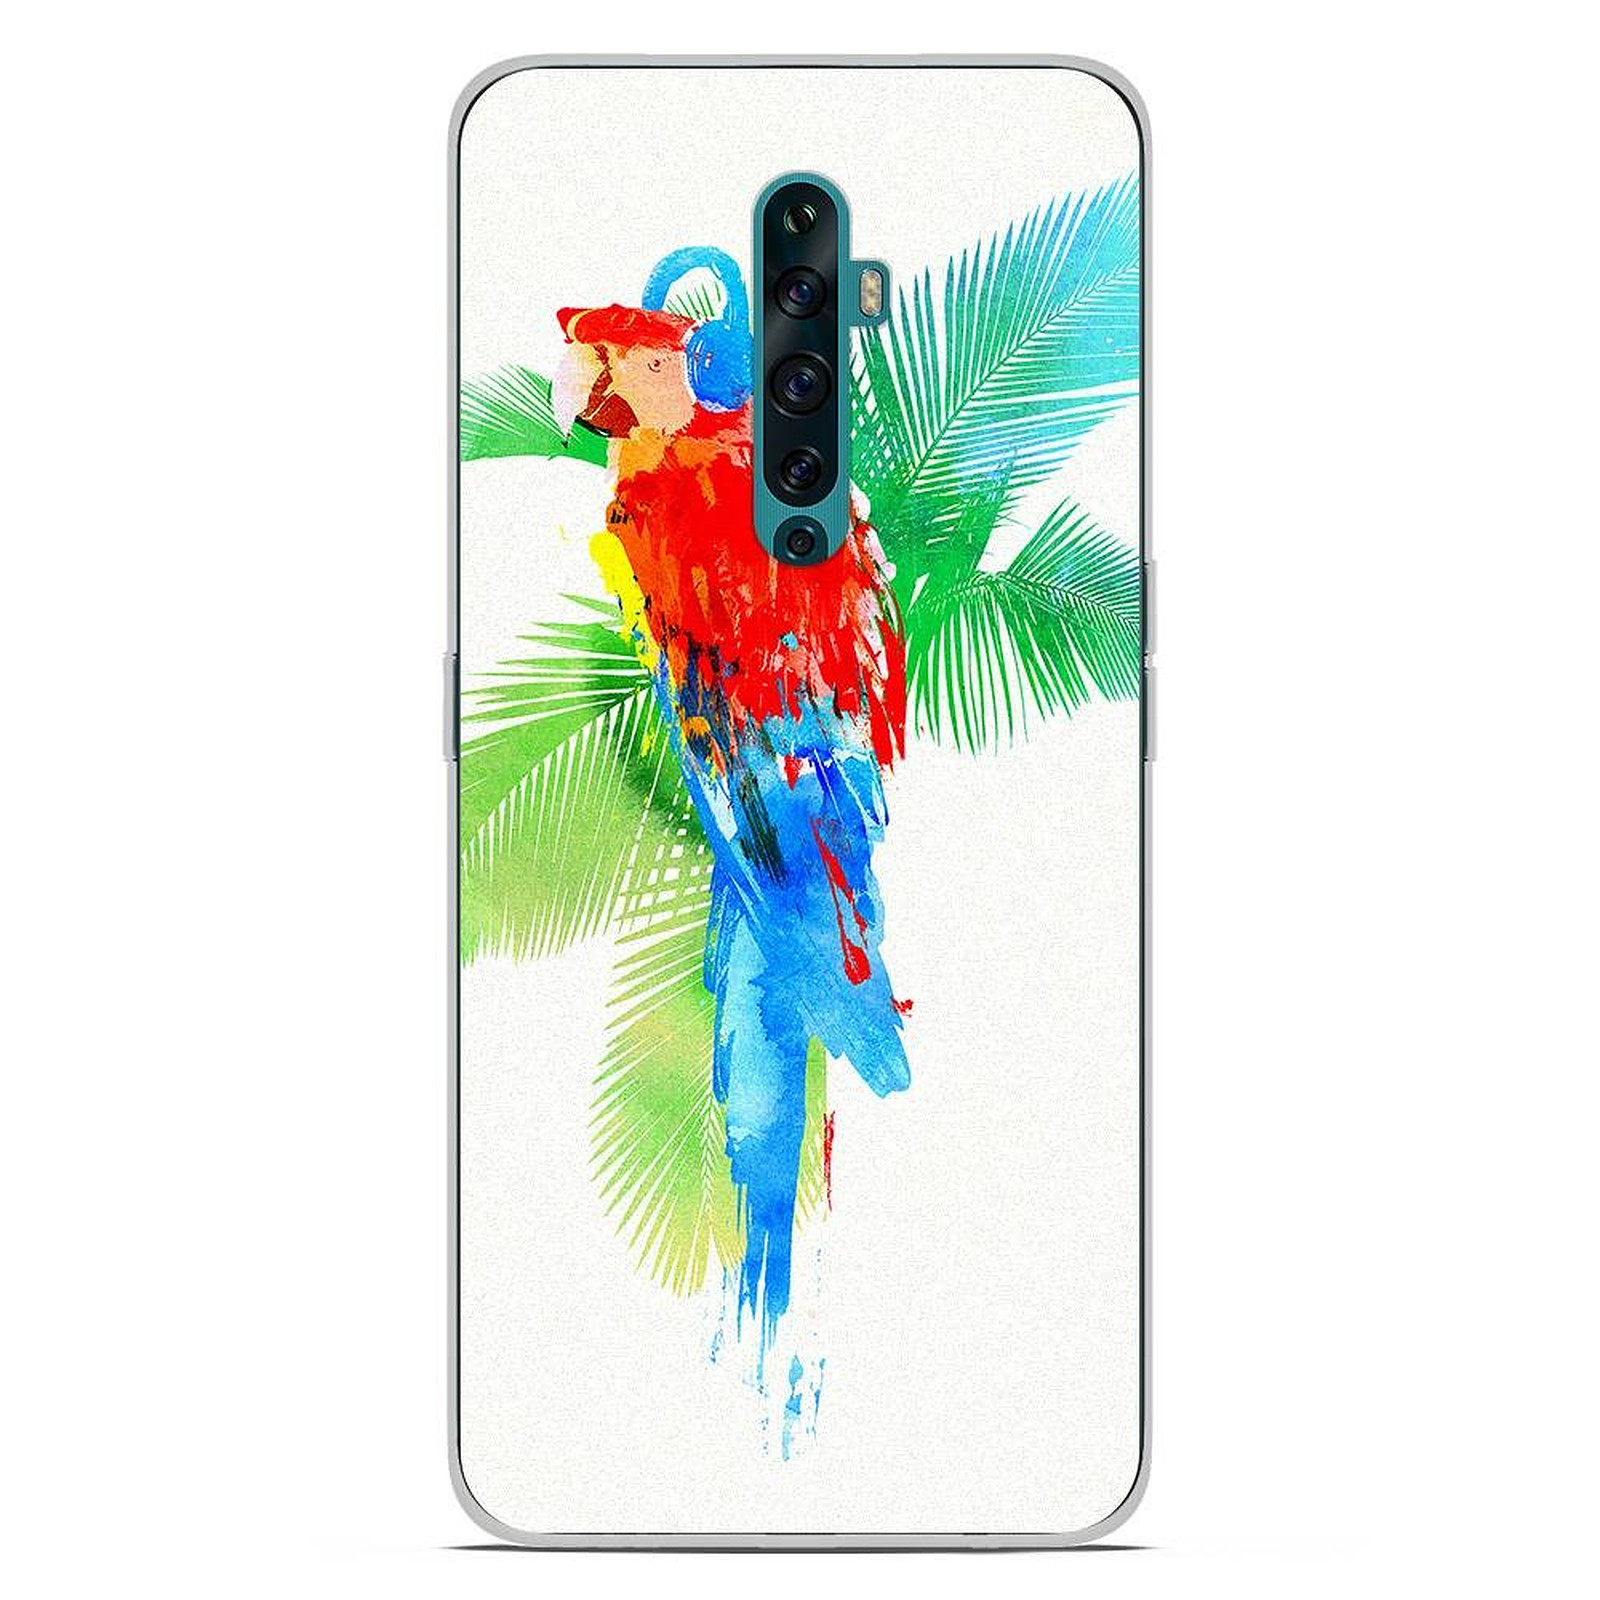 1001 Coques Coque silicone gel Oppo Reno 2Z motif RF Tropical party - Coque telephone 1001Coques